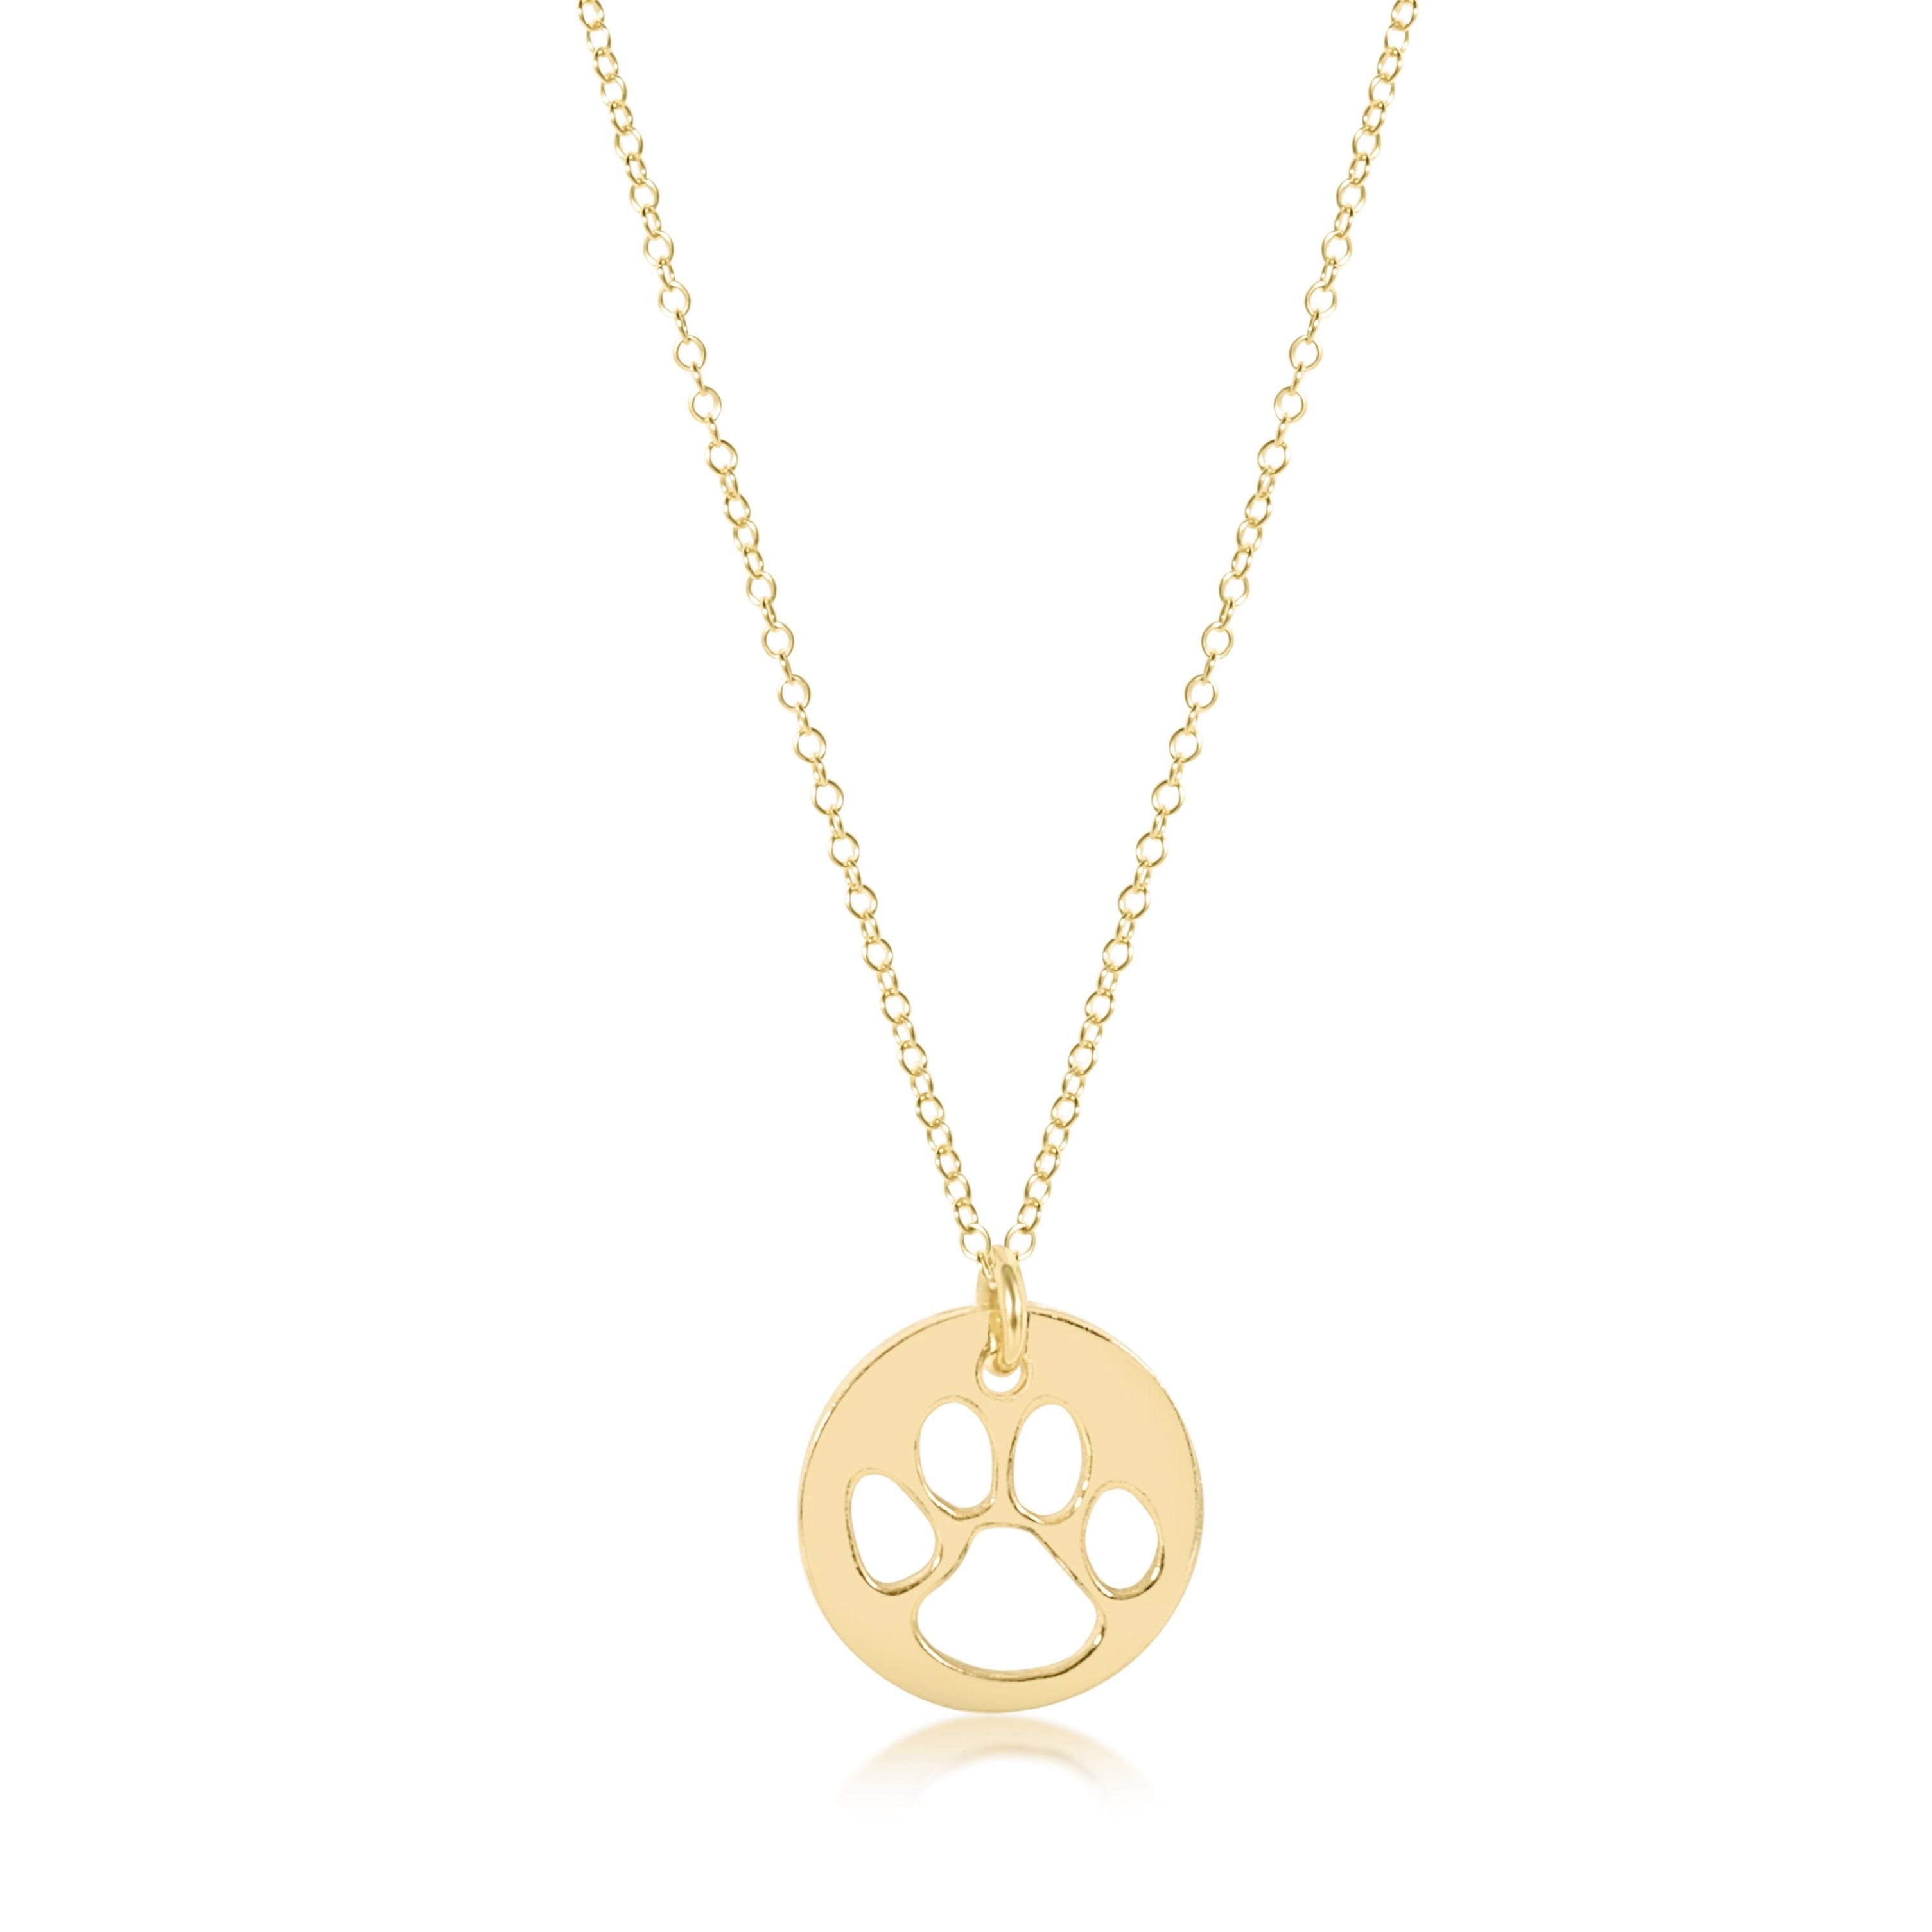 Buy A2S2 Cute Footprint Necklace Dog Cat Kitty Kitten Claw Paw Print Enamel  Gold Color Copper Chain Pendant Simple Fashion Jewelry (White/Gold) at  Amazon.in